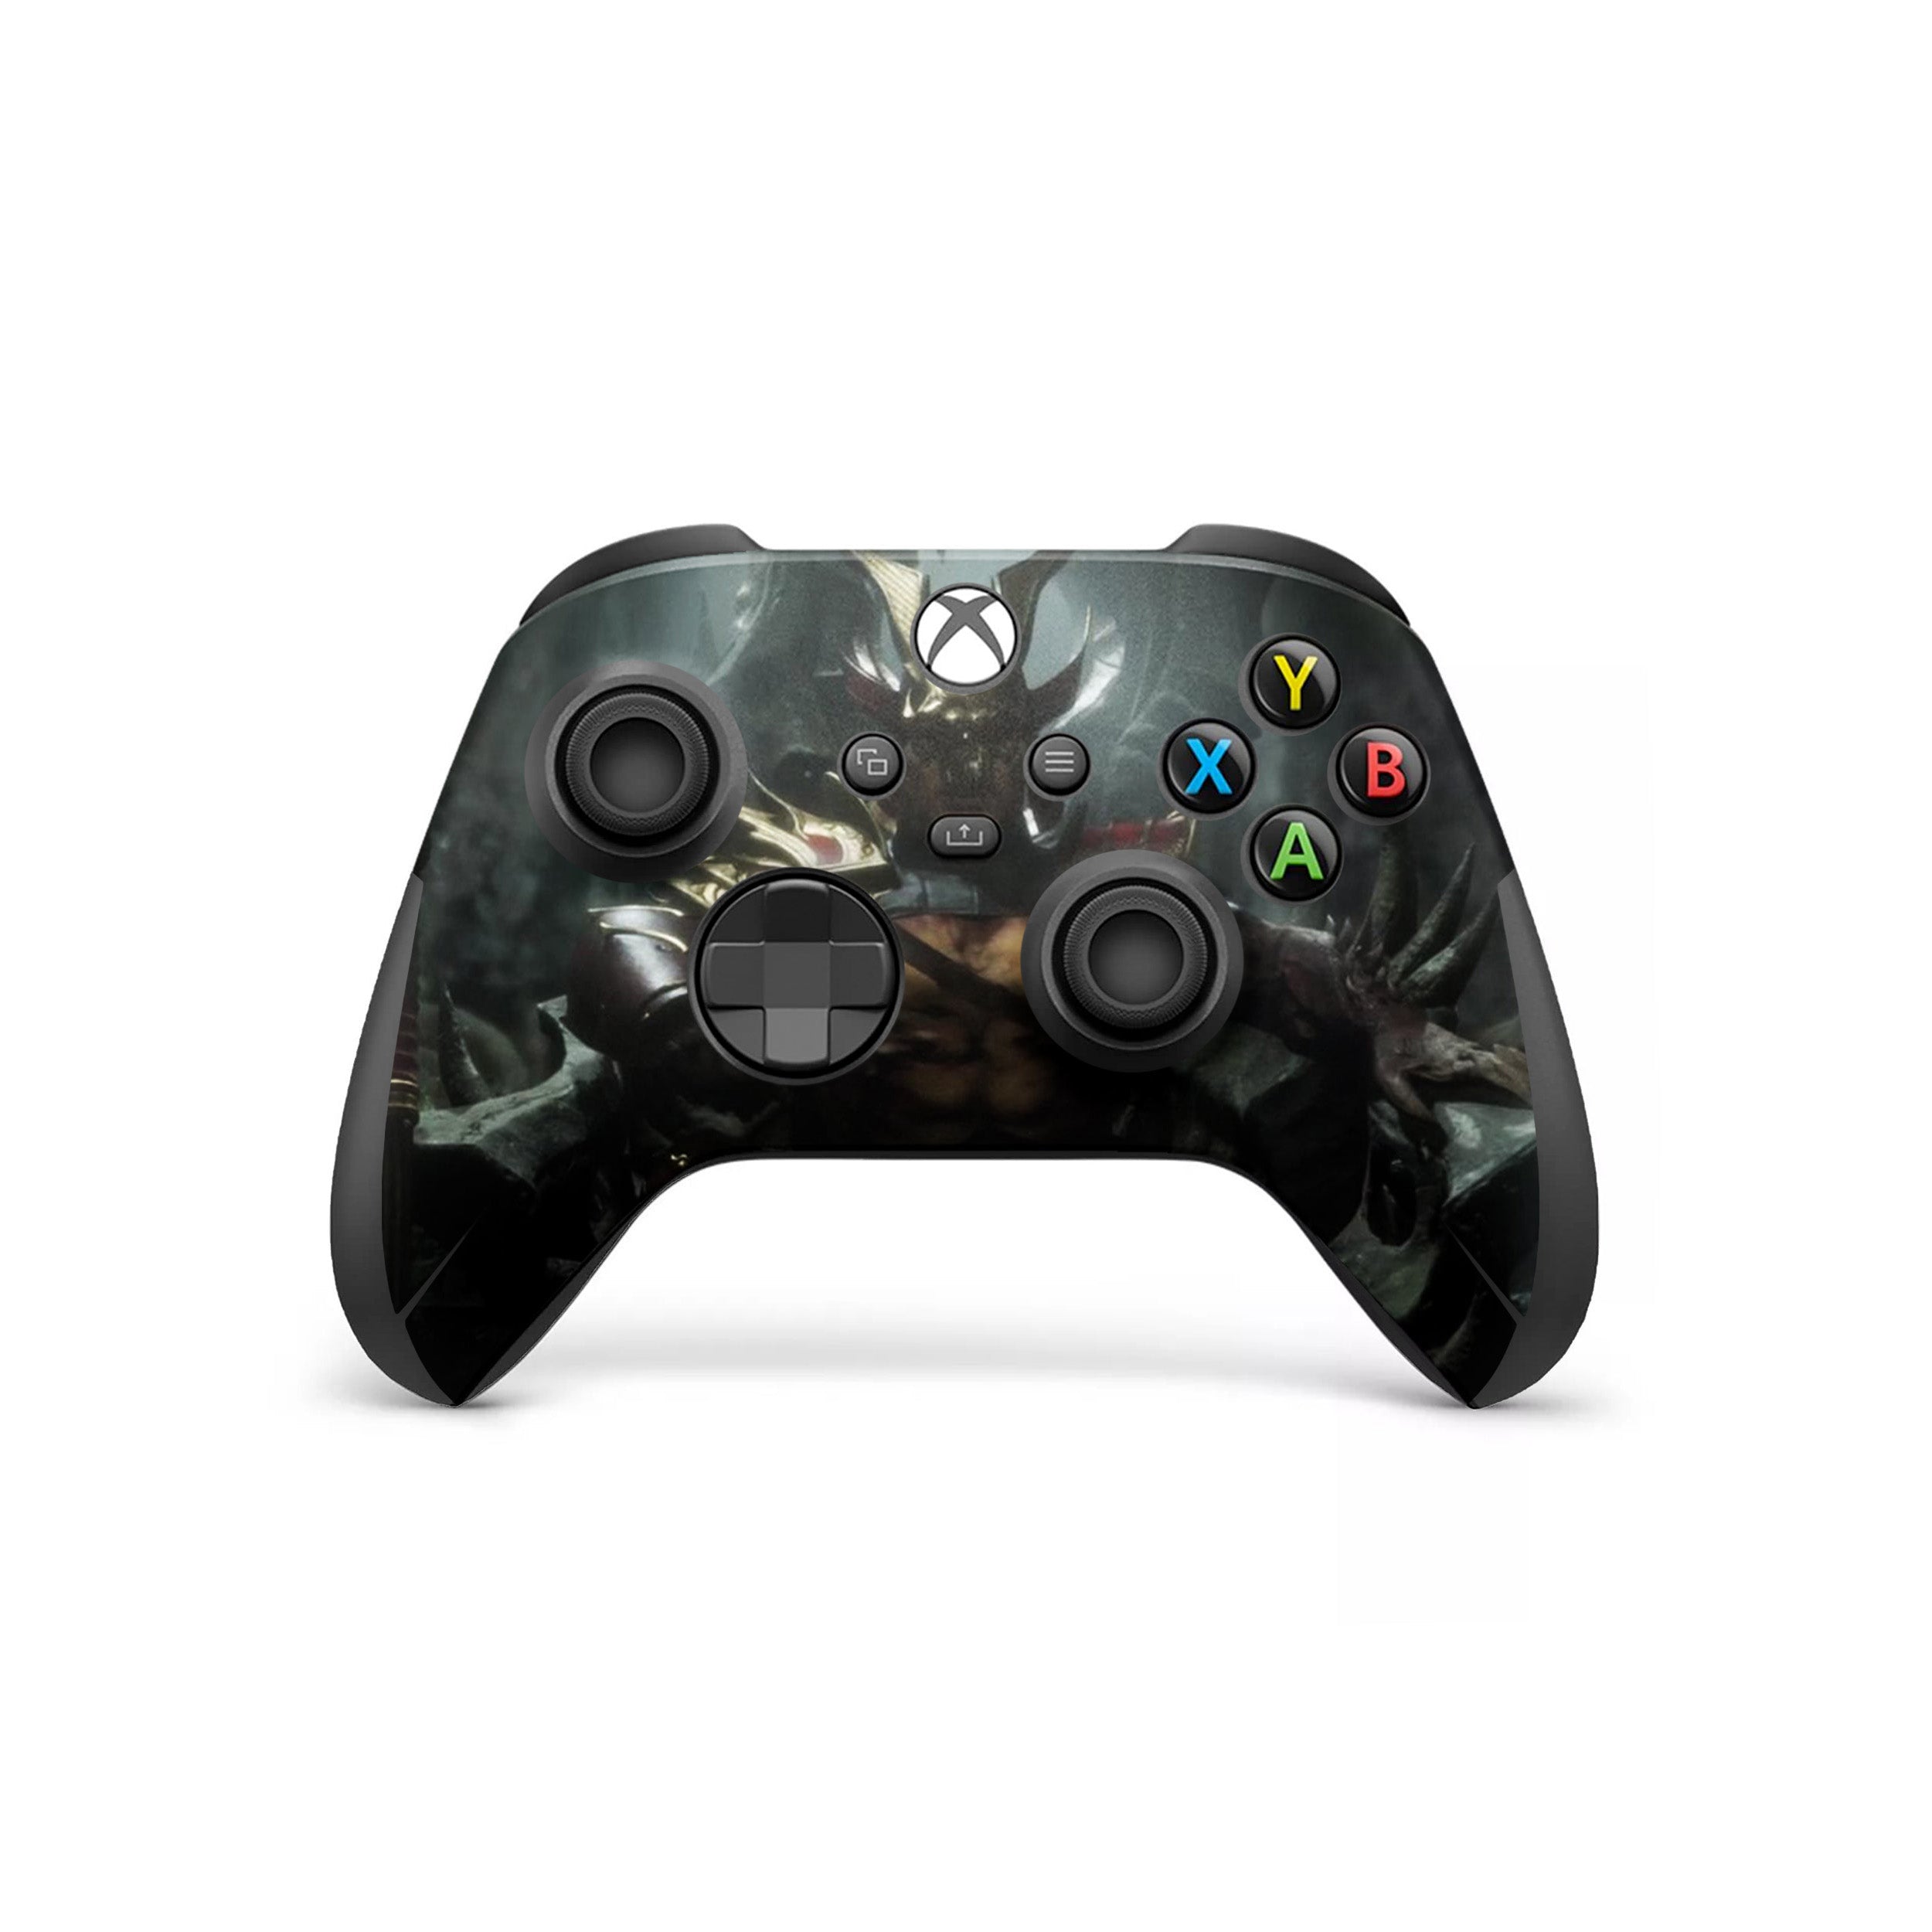 A video game skin featuring a Mortal Kombat 11 Scorpion design for the Xbox Wireless Controller.